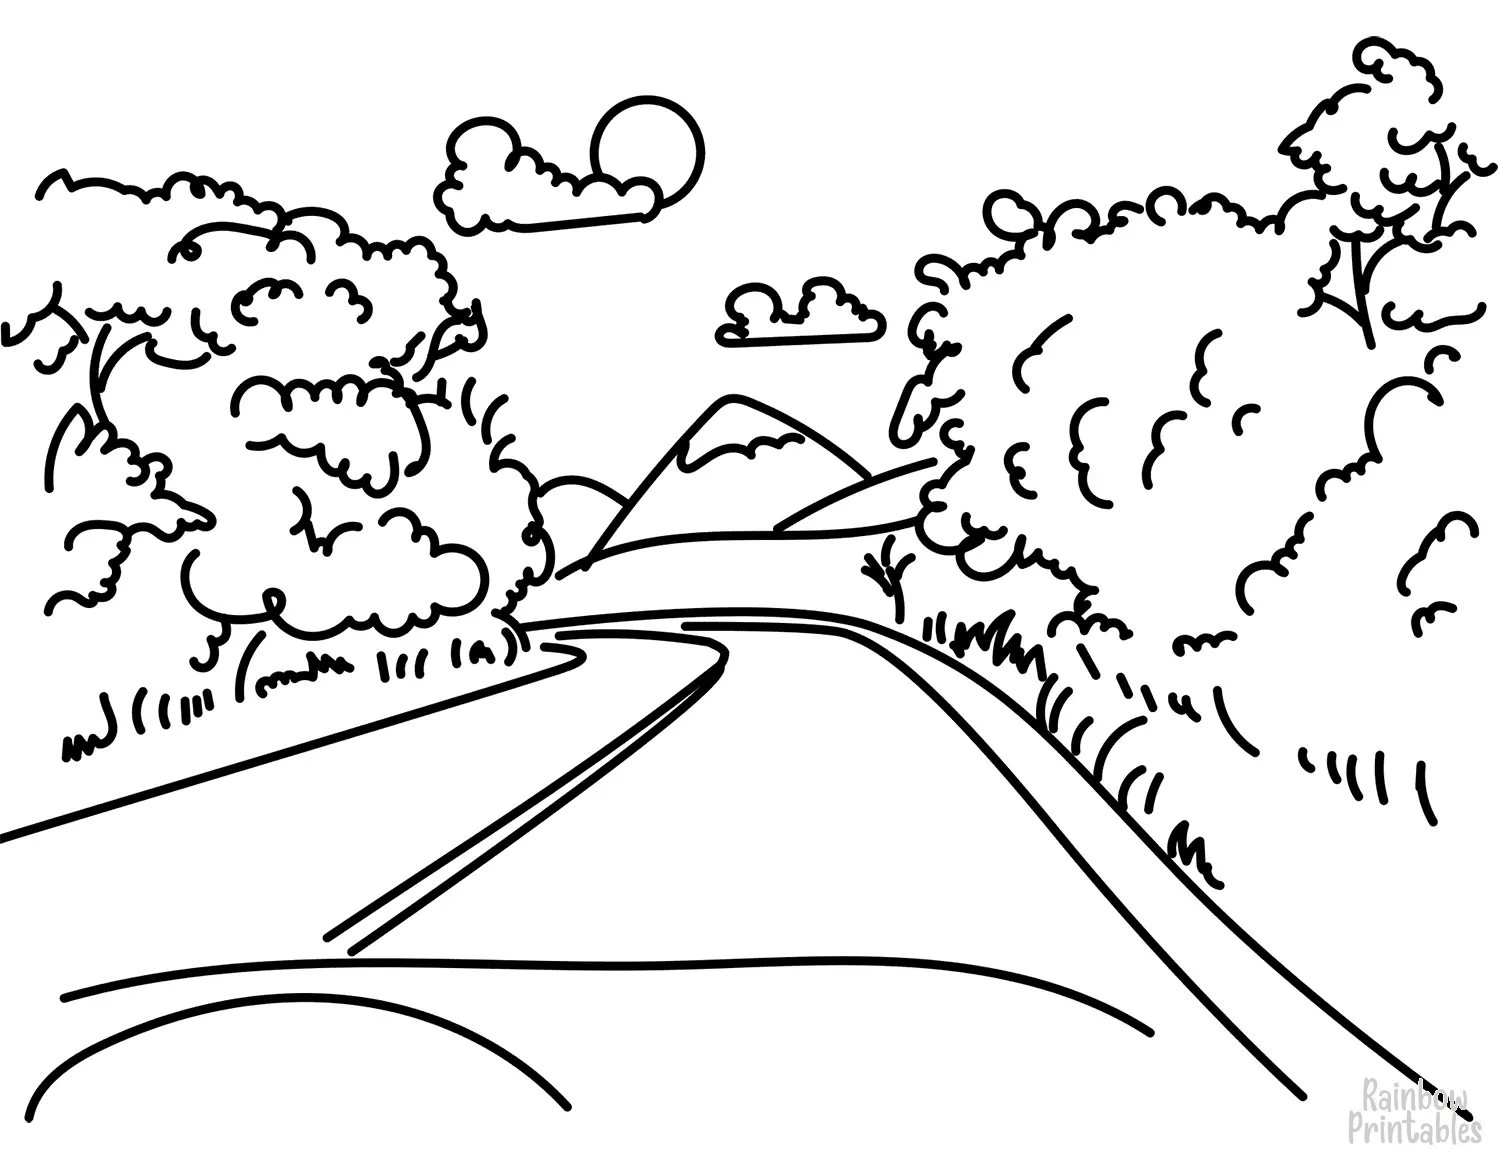 ROAD-in-mountain-Clipart Coloring Pages for Kids Adults Art Activities Line Art